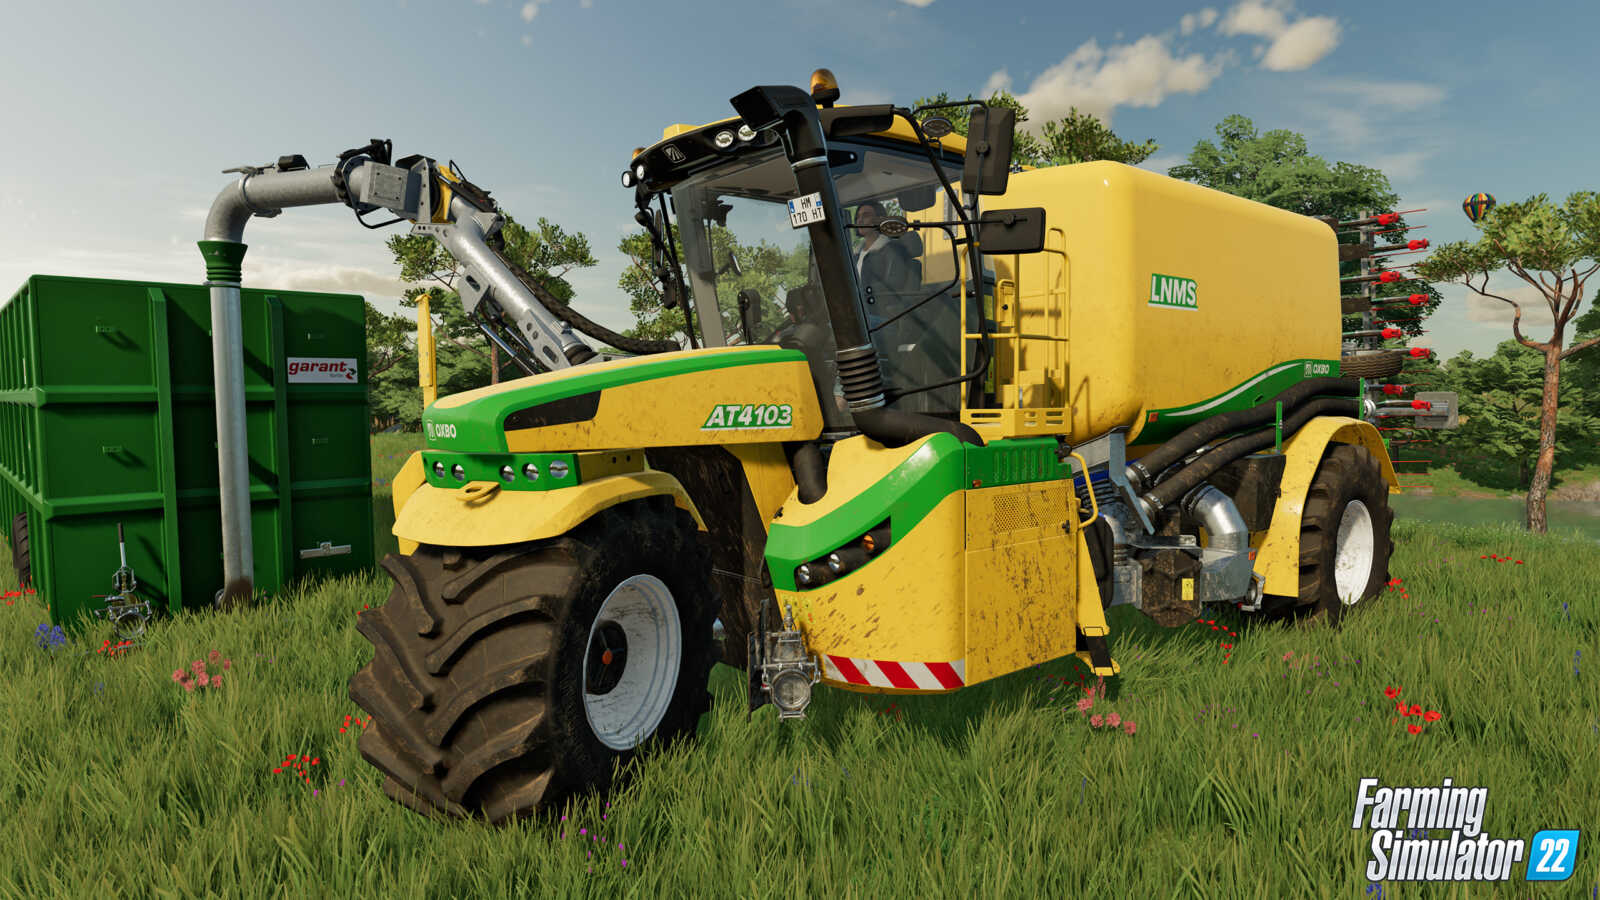 The OXBO Pack for Farming Simulator 22 was the mystery DLC!